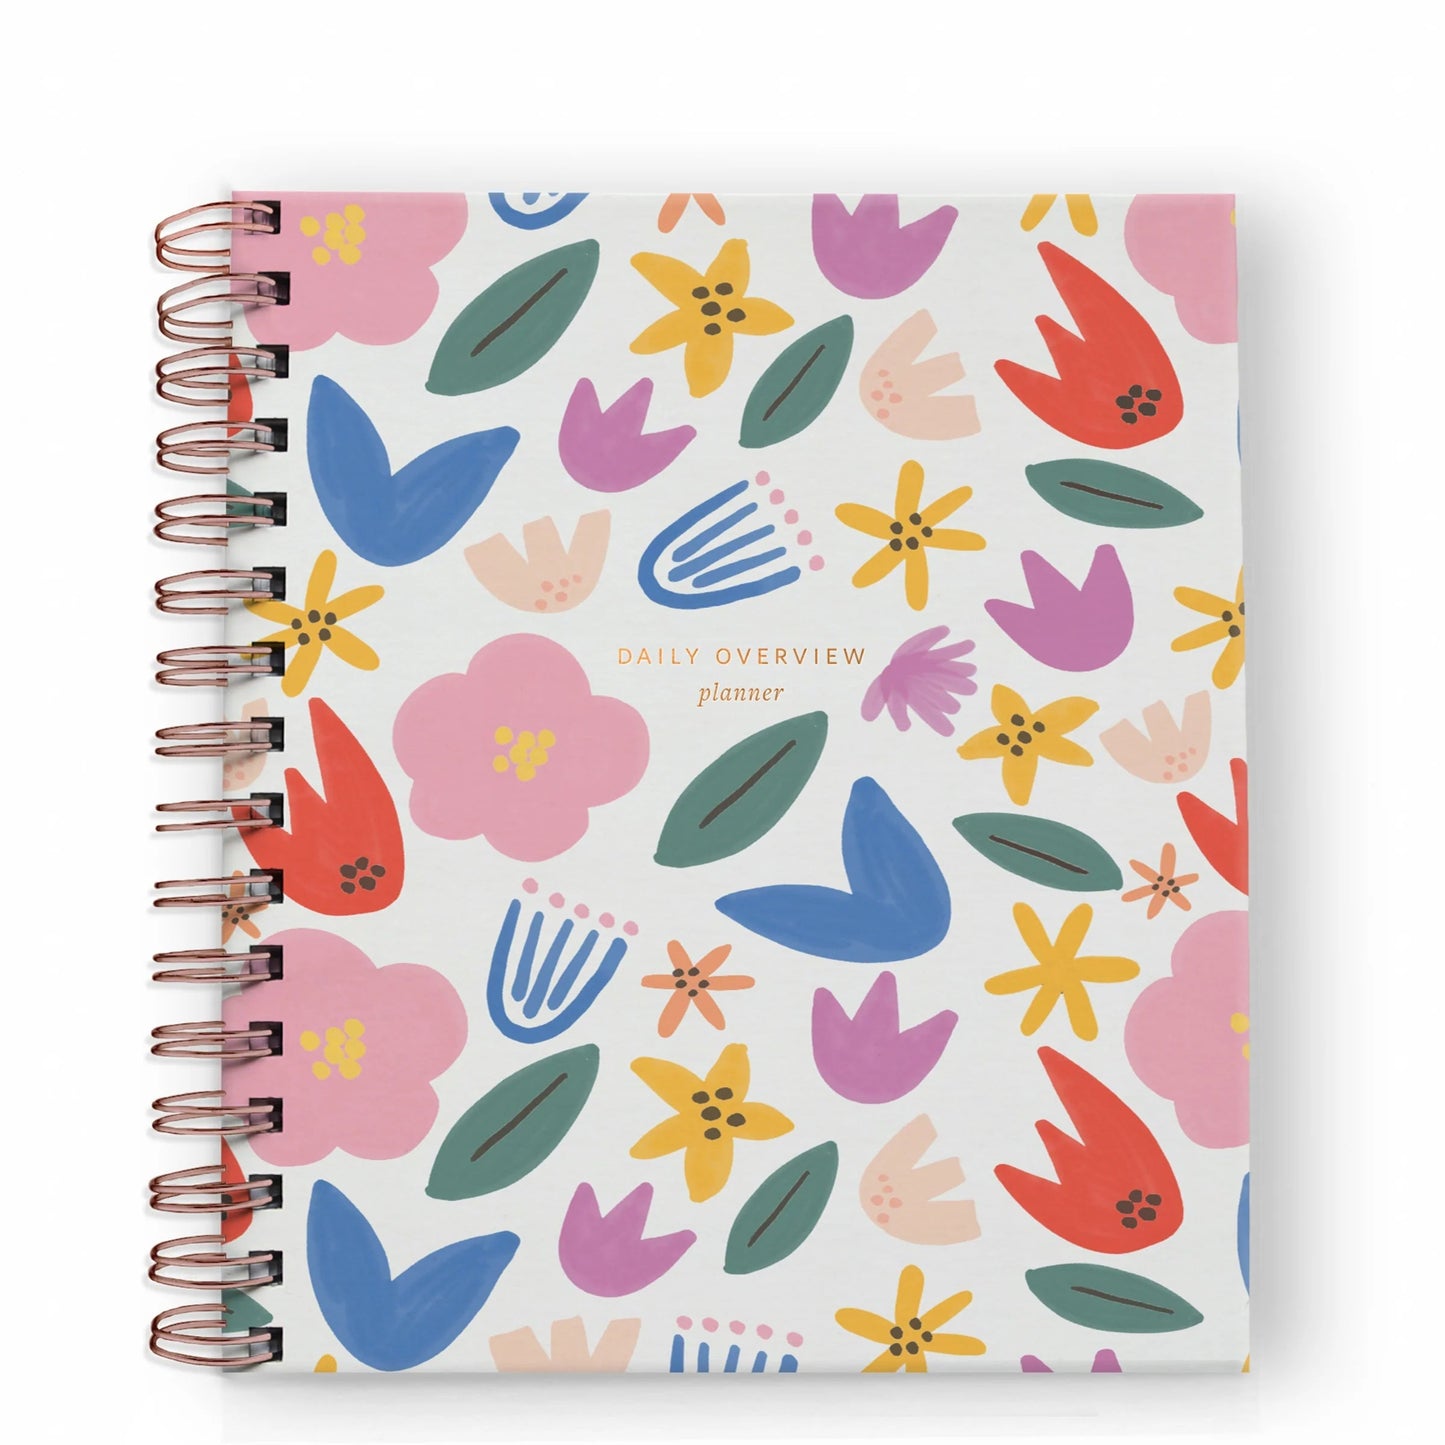 Daily Overview Planner - Floral